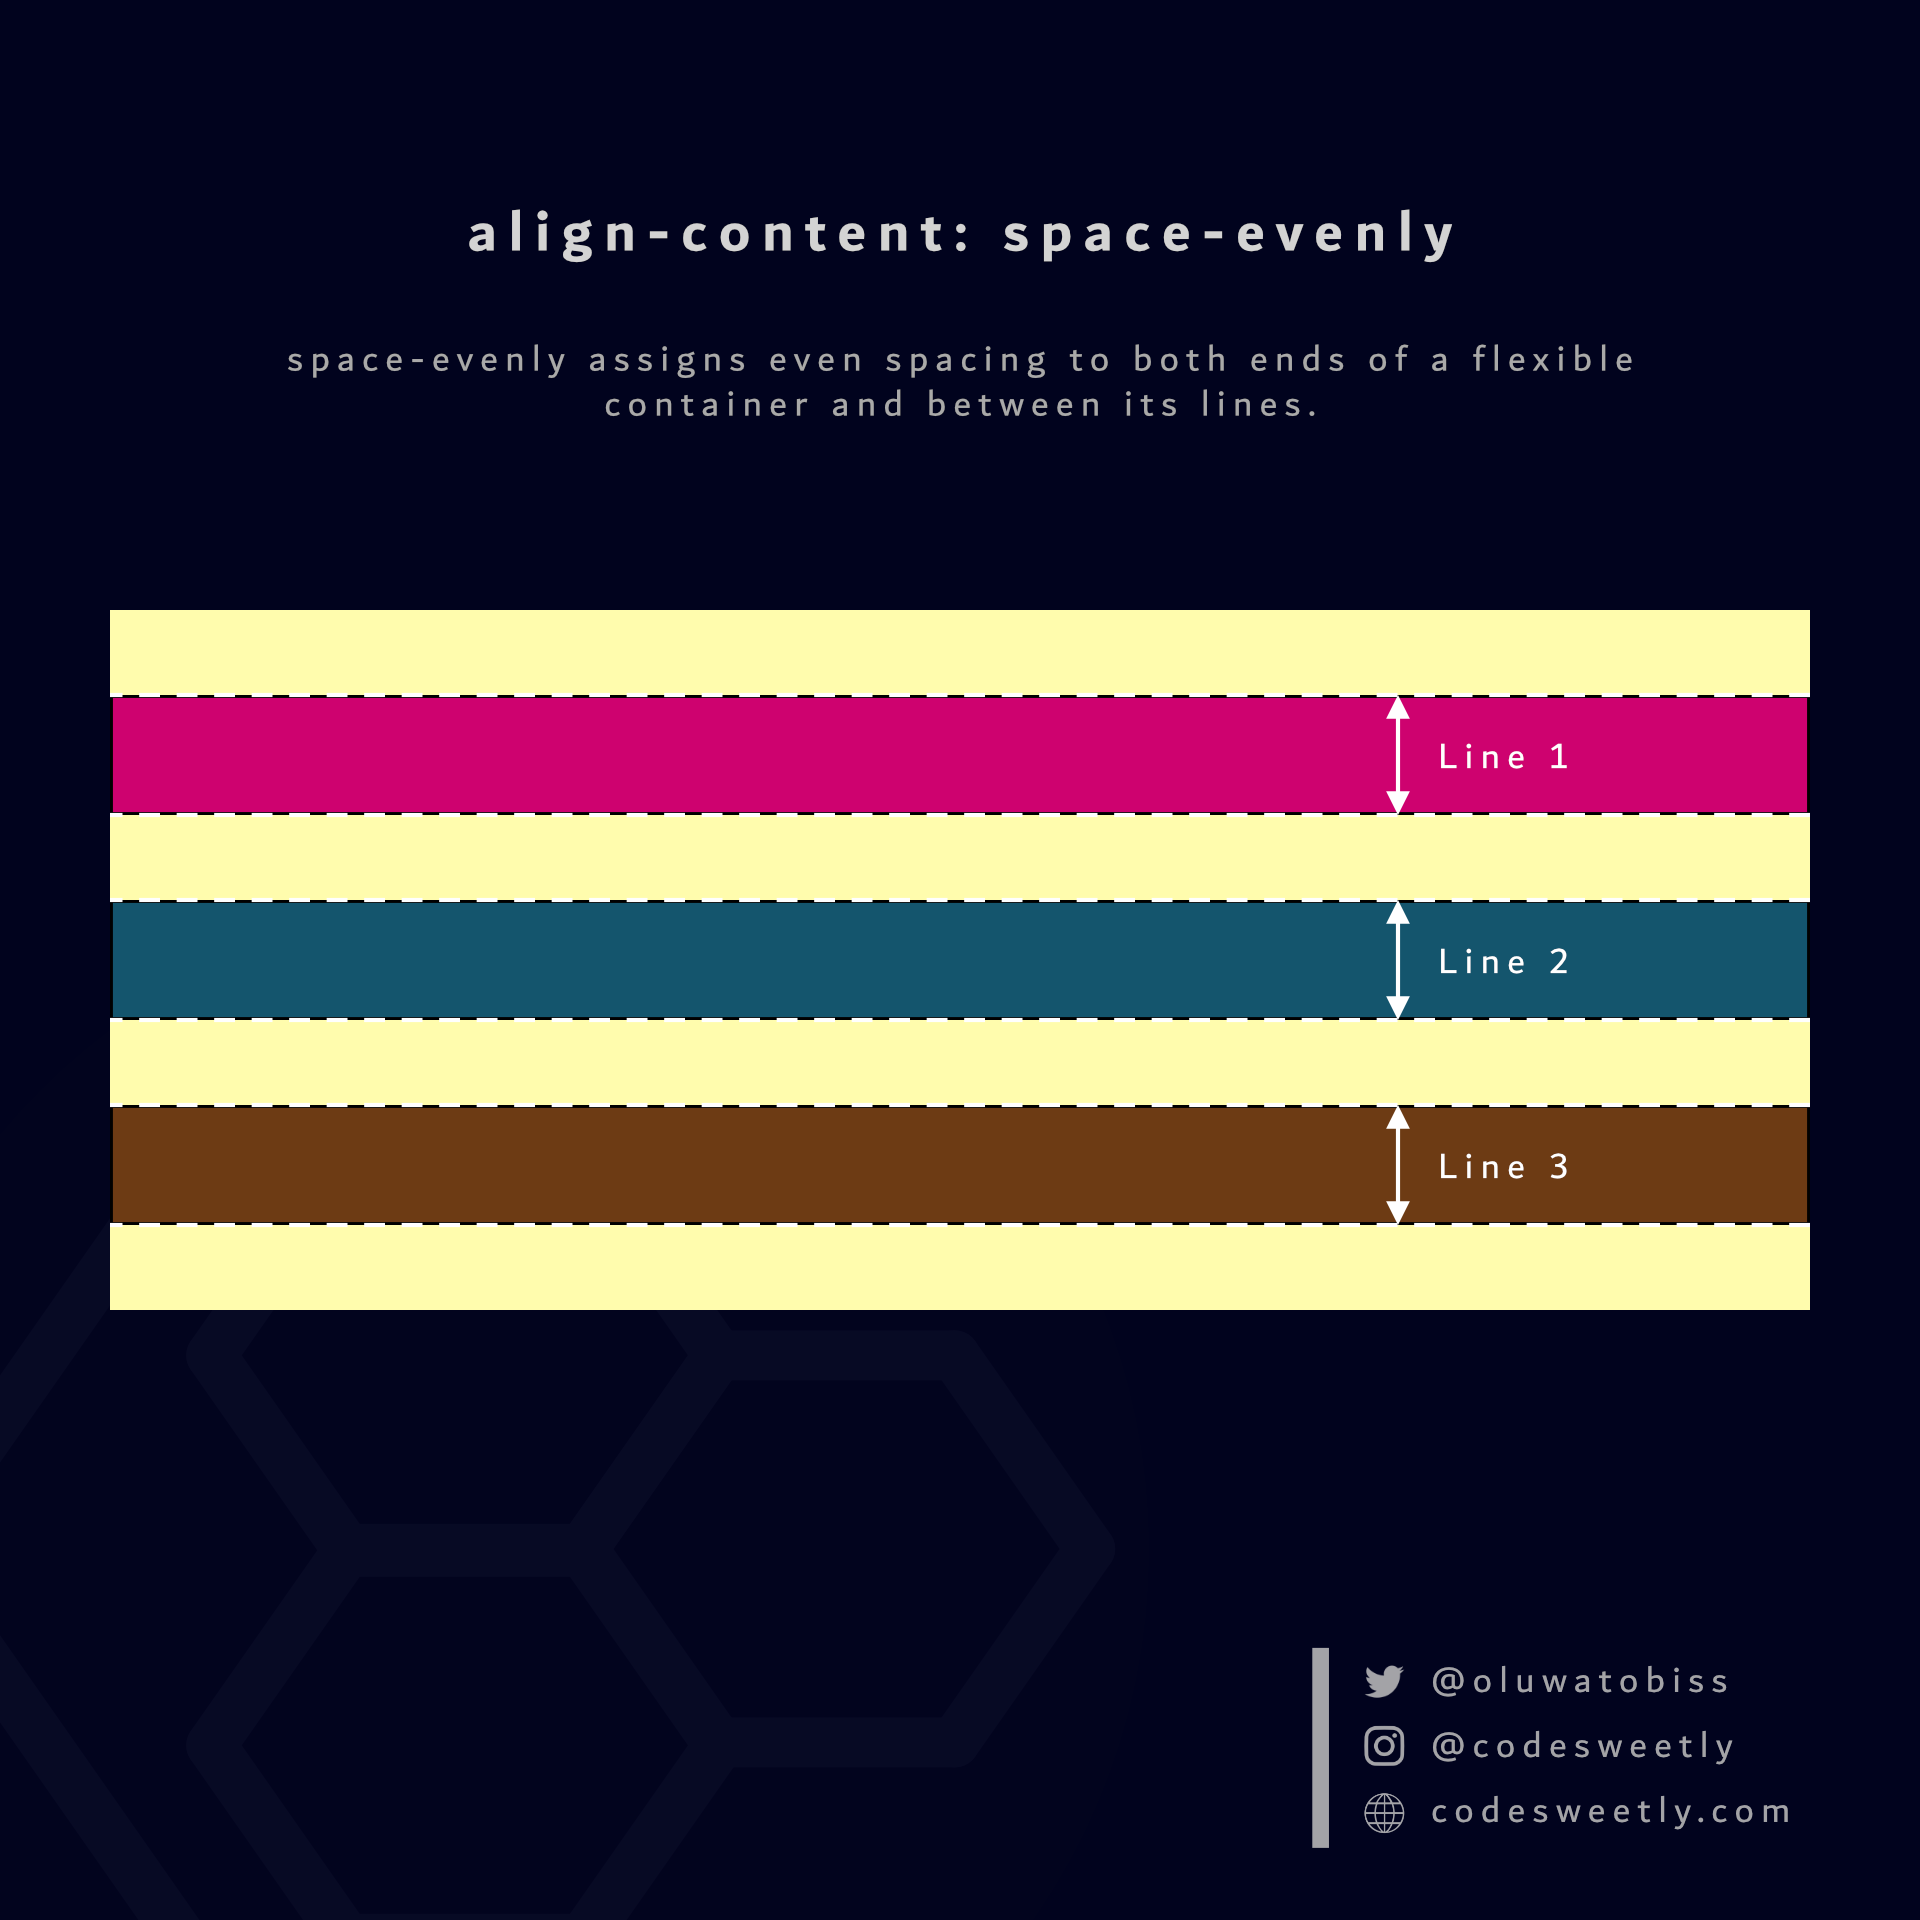 Illustration of align-content&#39;s space-evenly
value